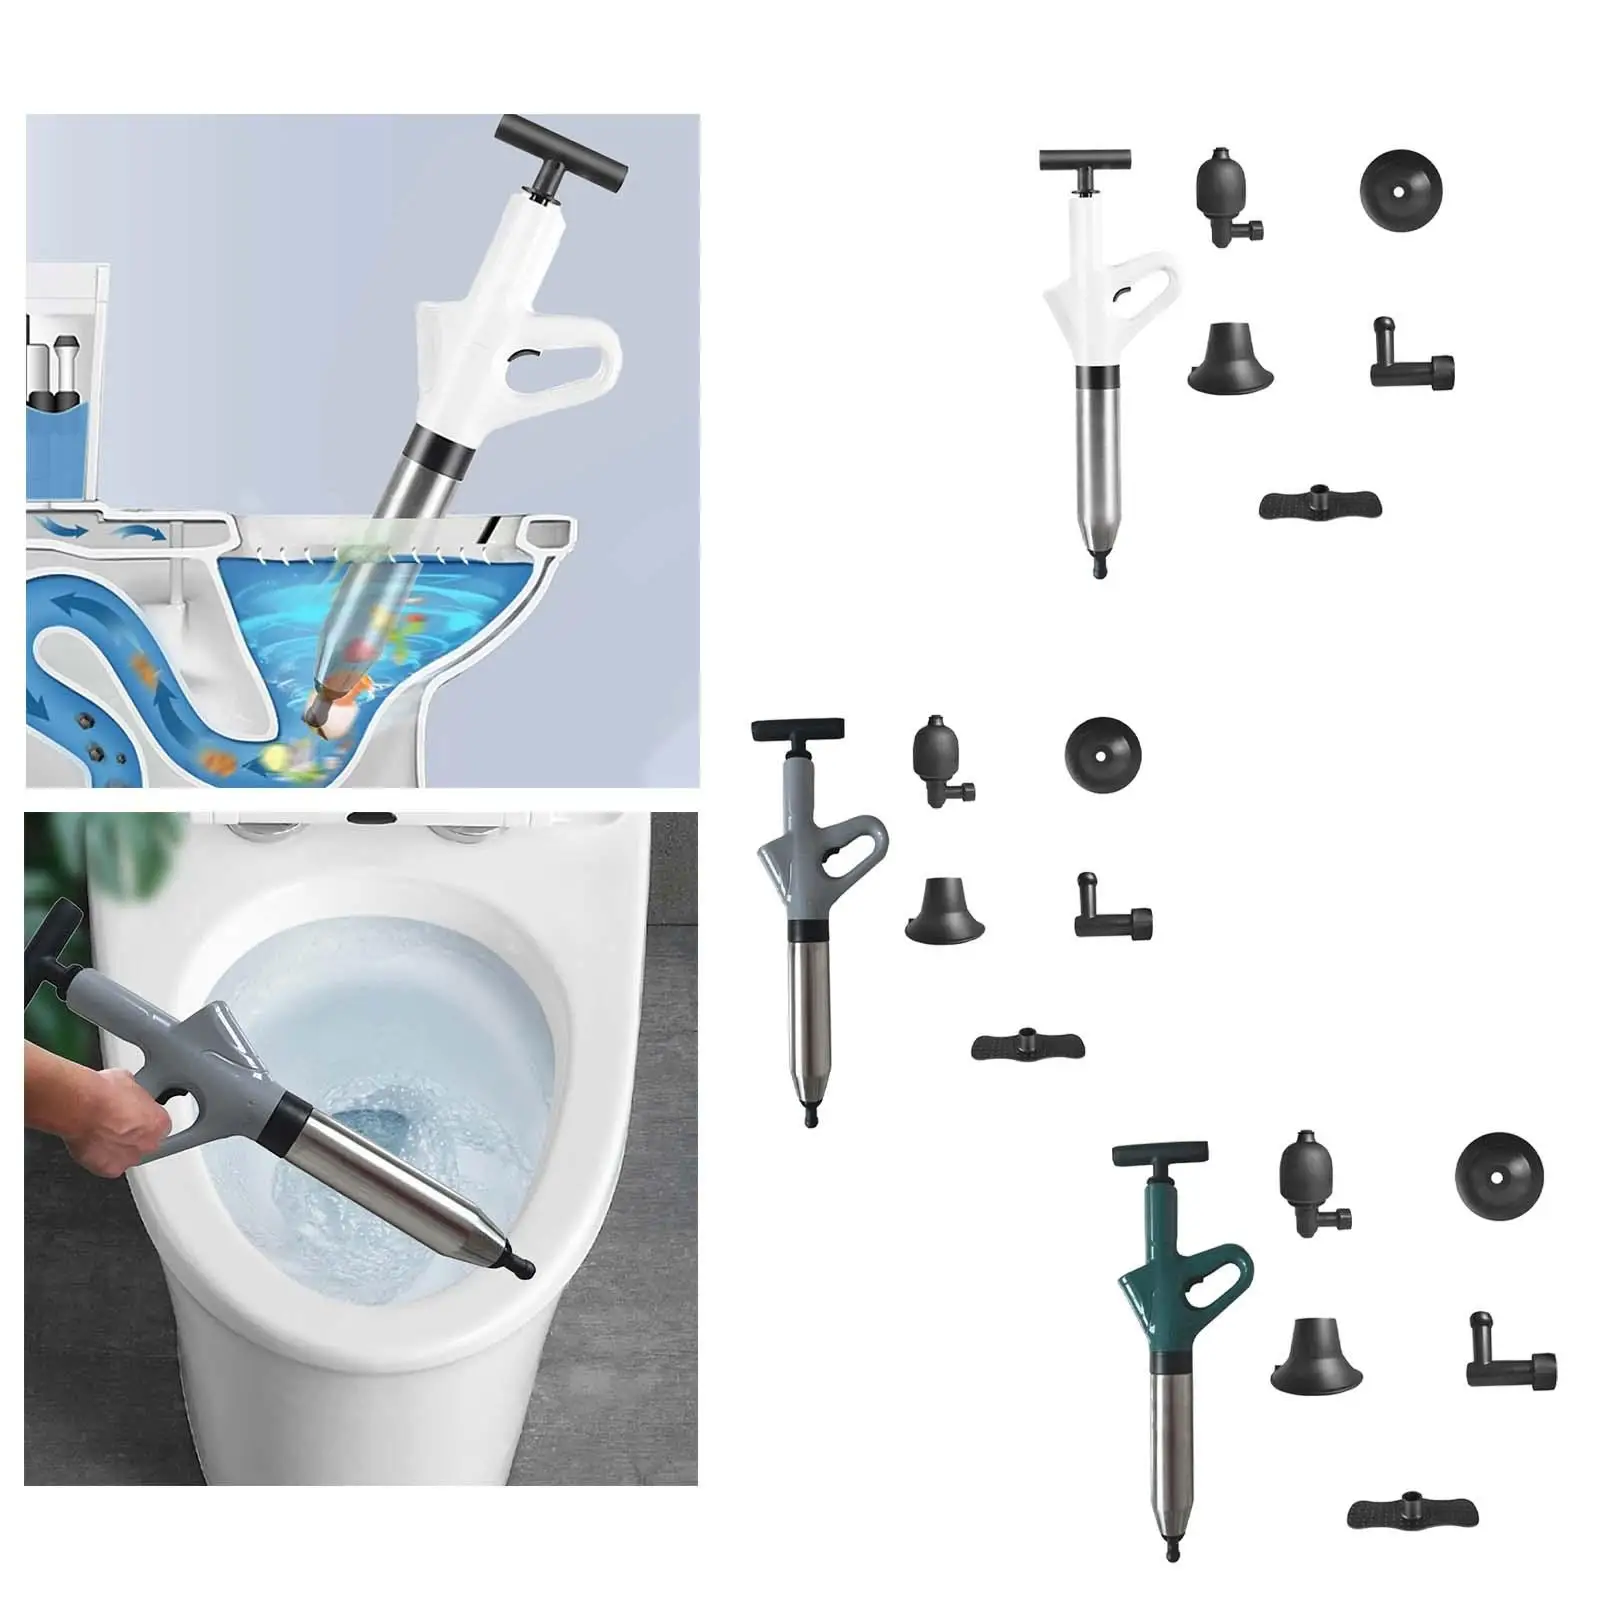 Toilet Plunger Manual Sink Plungers for Washbasin Clogged Toilet Bathtub